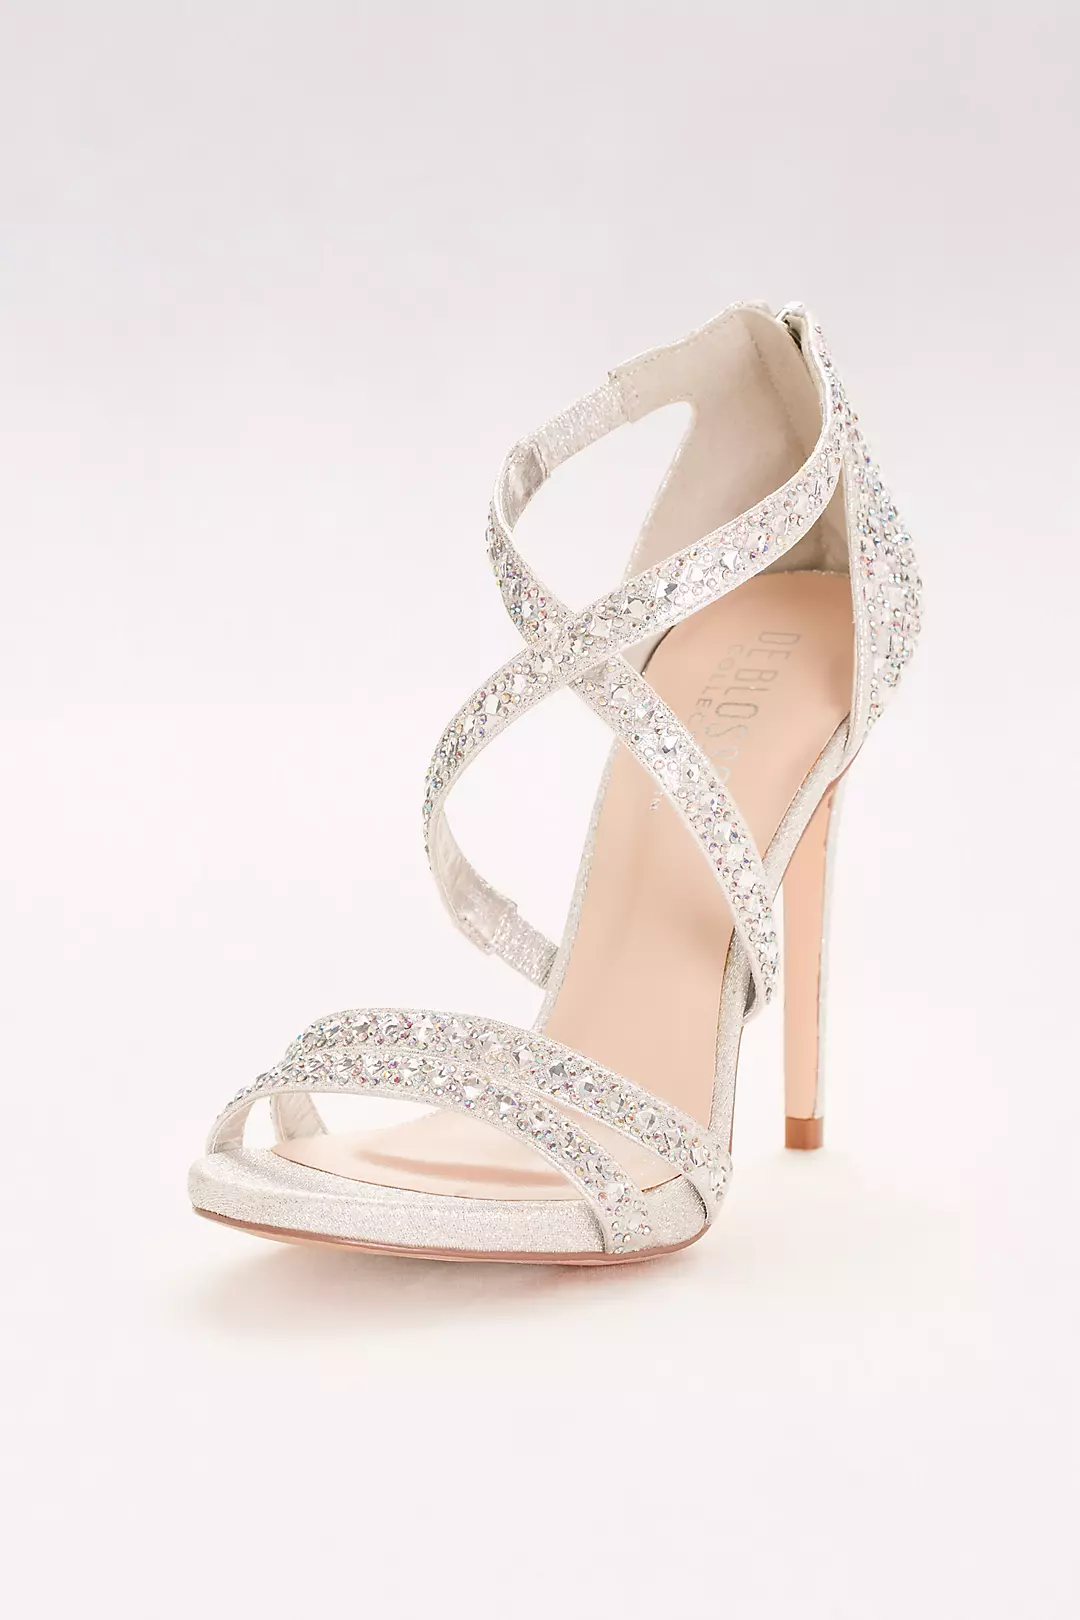 Crisscross Strappy Heels with Crystals Image